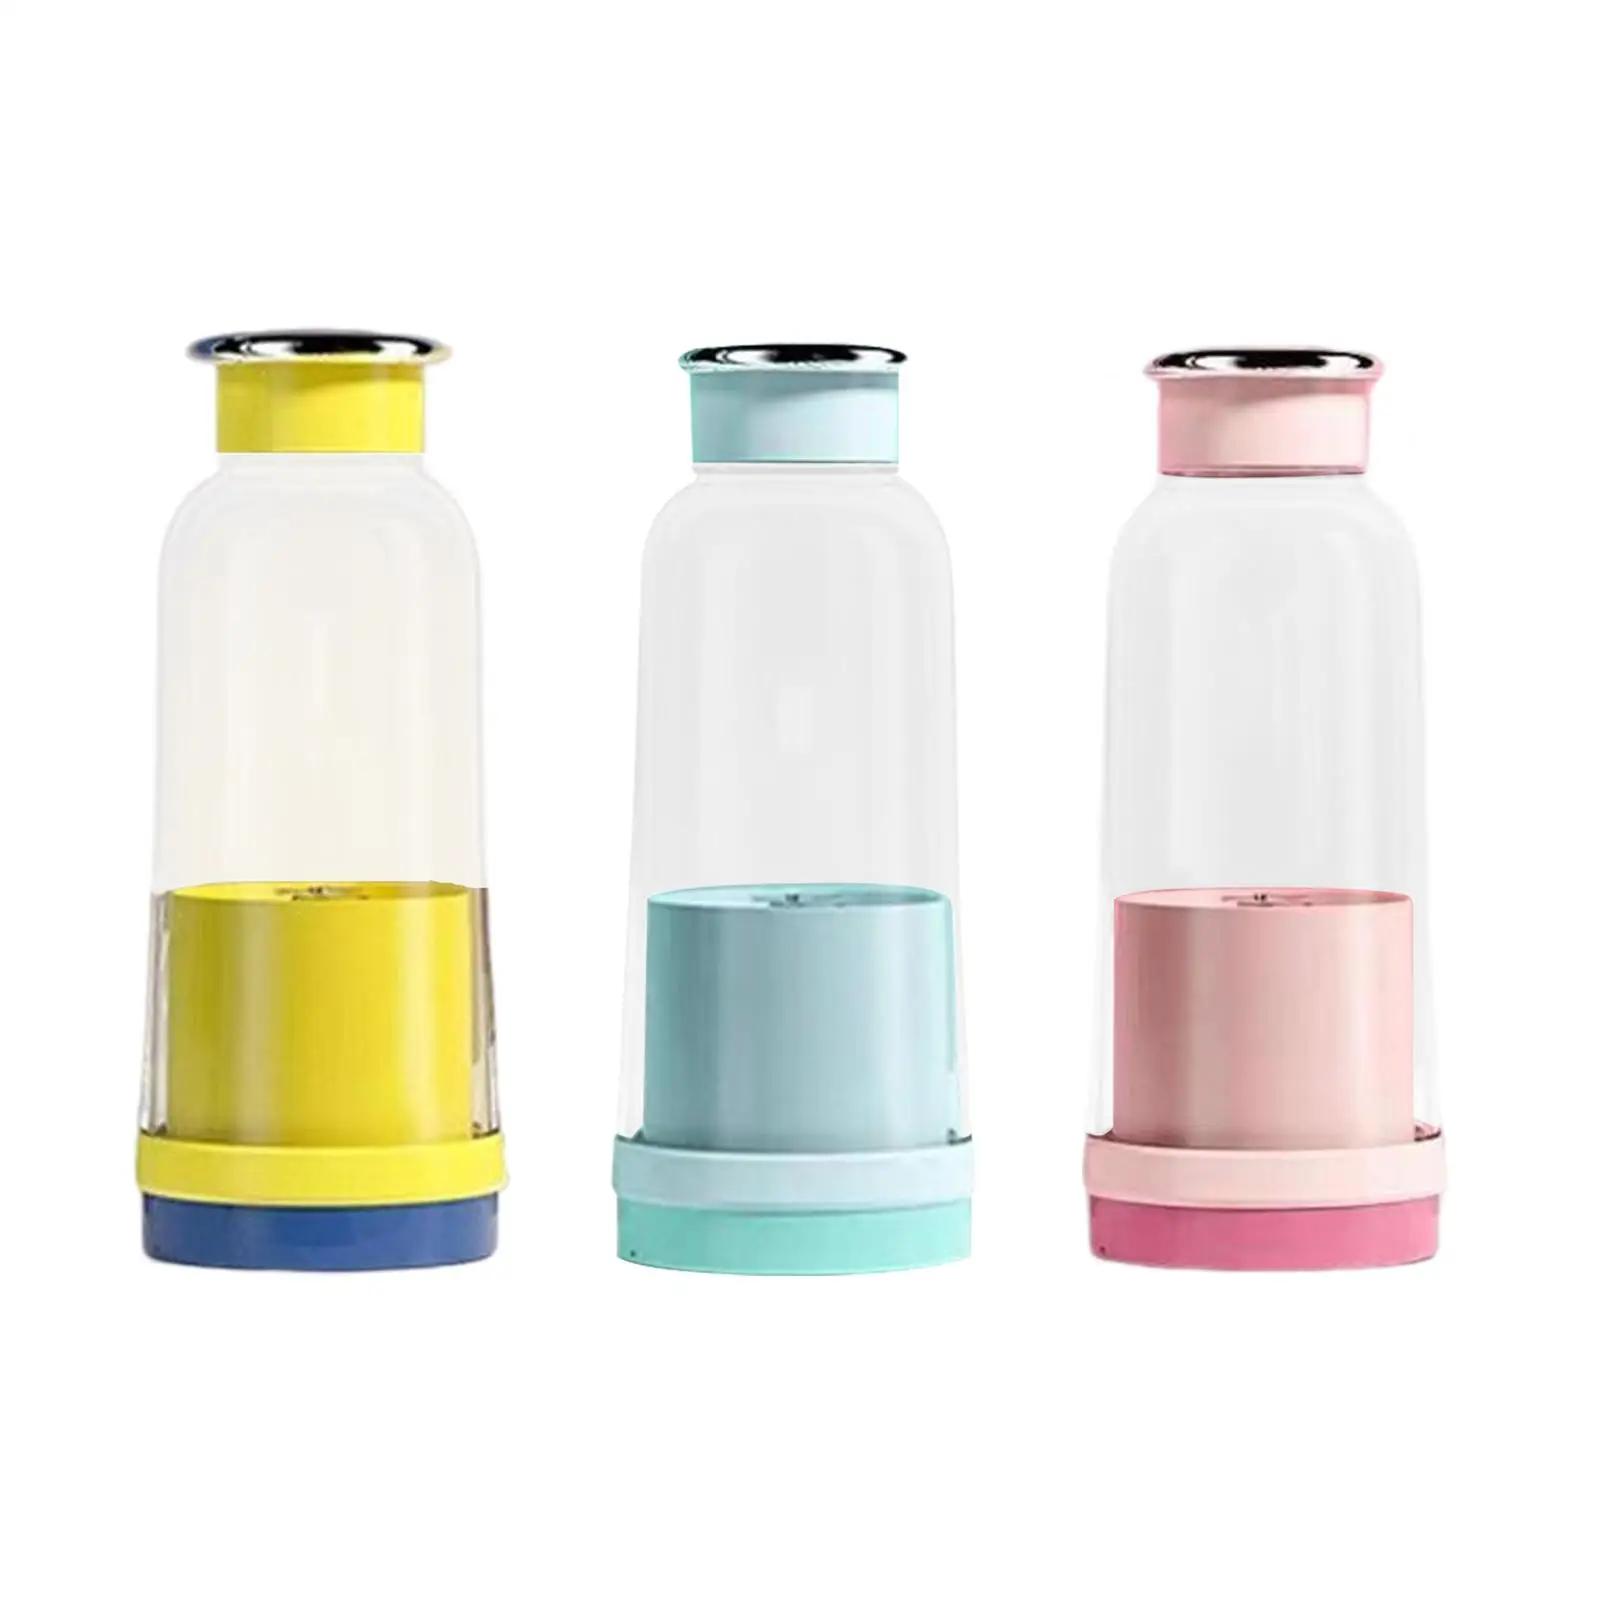 Portable Juice Cup USB Multifunctional Smoothies Small Kitchen Appliances Food Shaker Smoothie for Outdoor Kitchen Home Camping